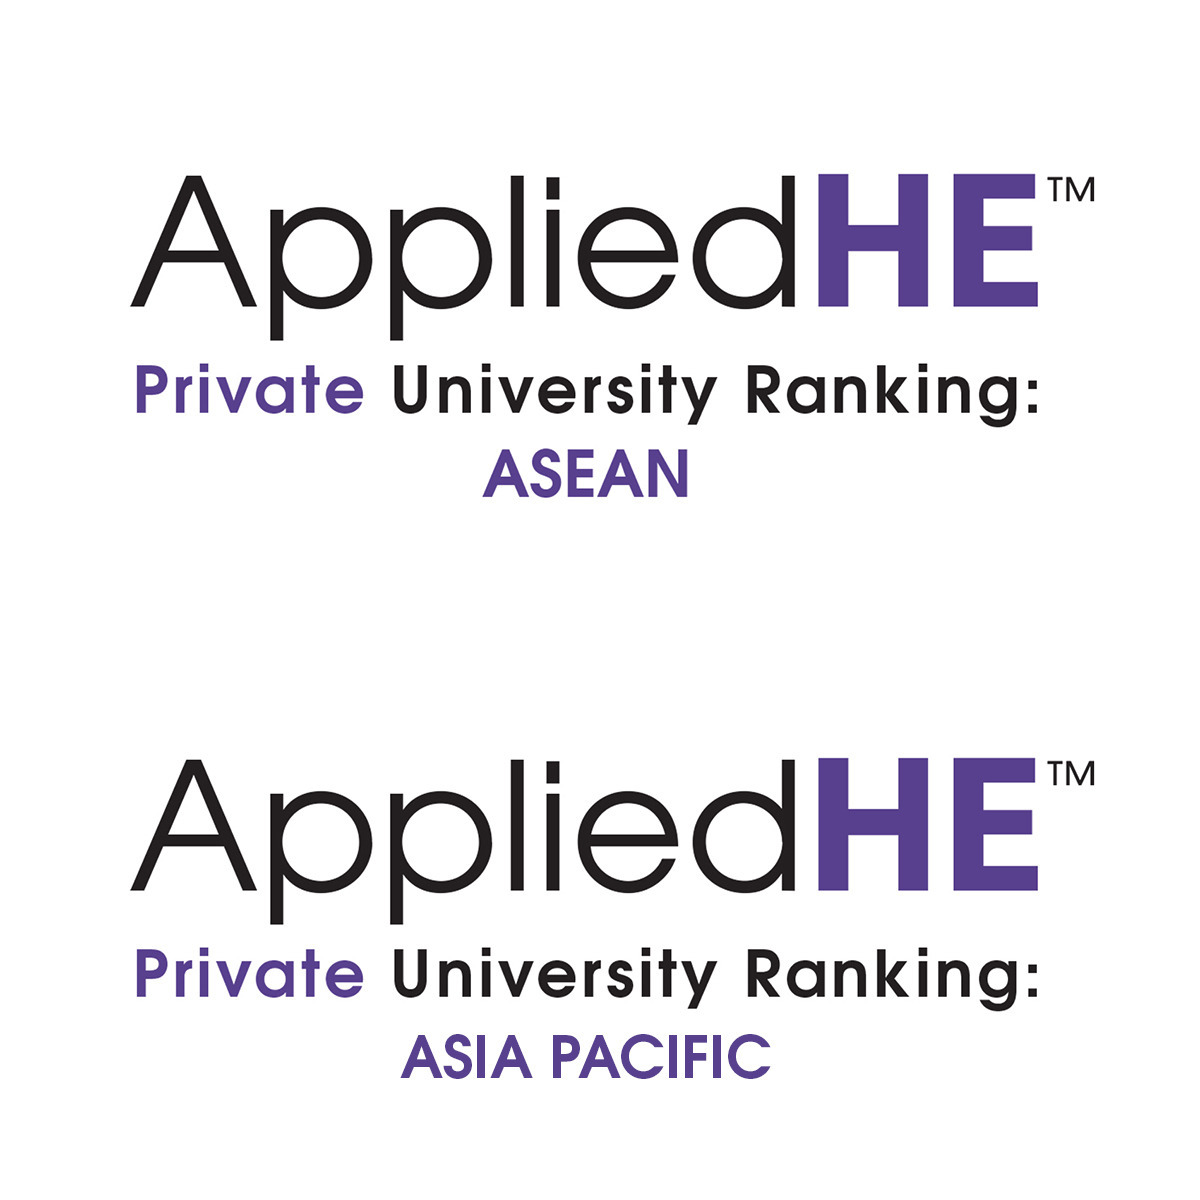 AppliedHE Ranking Terms and Conditions